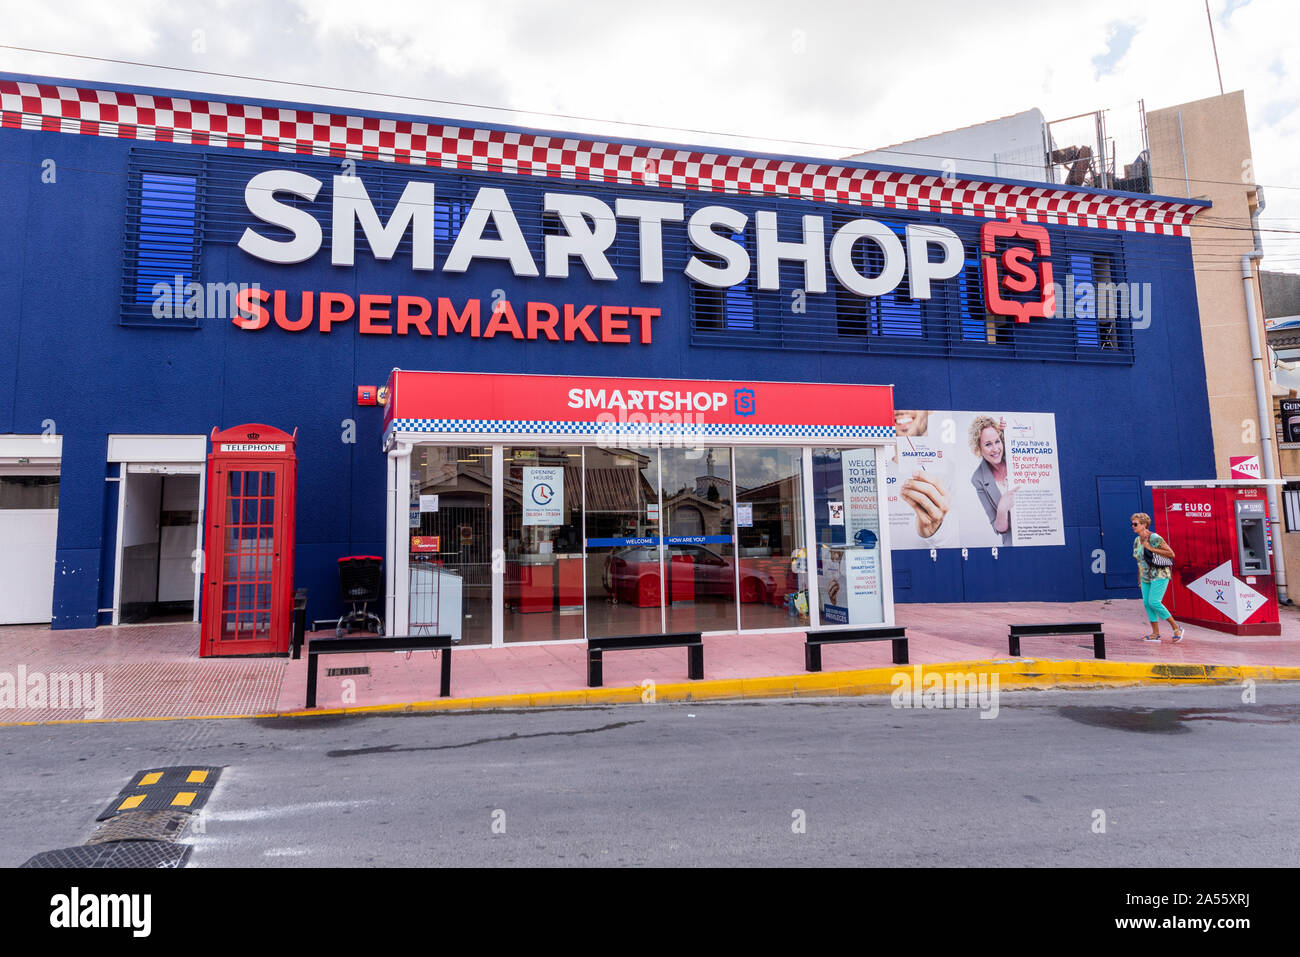 Smartshop Supermarket English, British oriented shop store in Ciudad Quesada, Rojales Spain. Brits abroad. Appealing to ex-pats with red telephone box Stock Photo